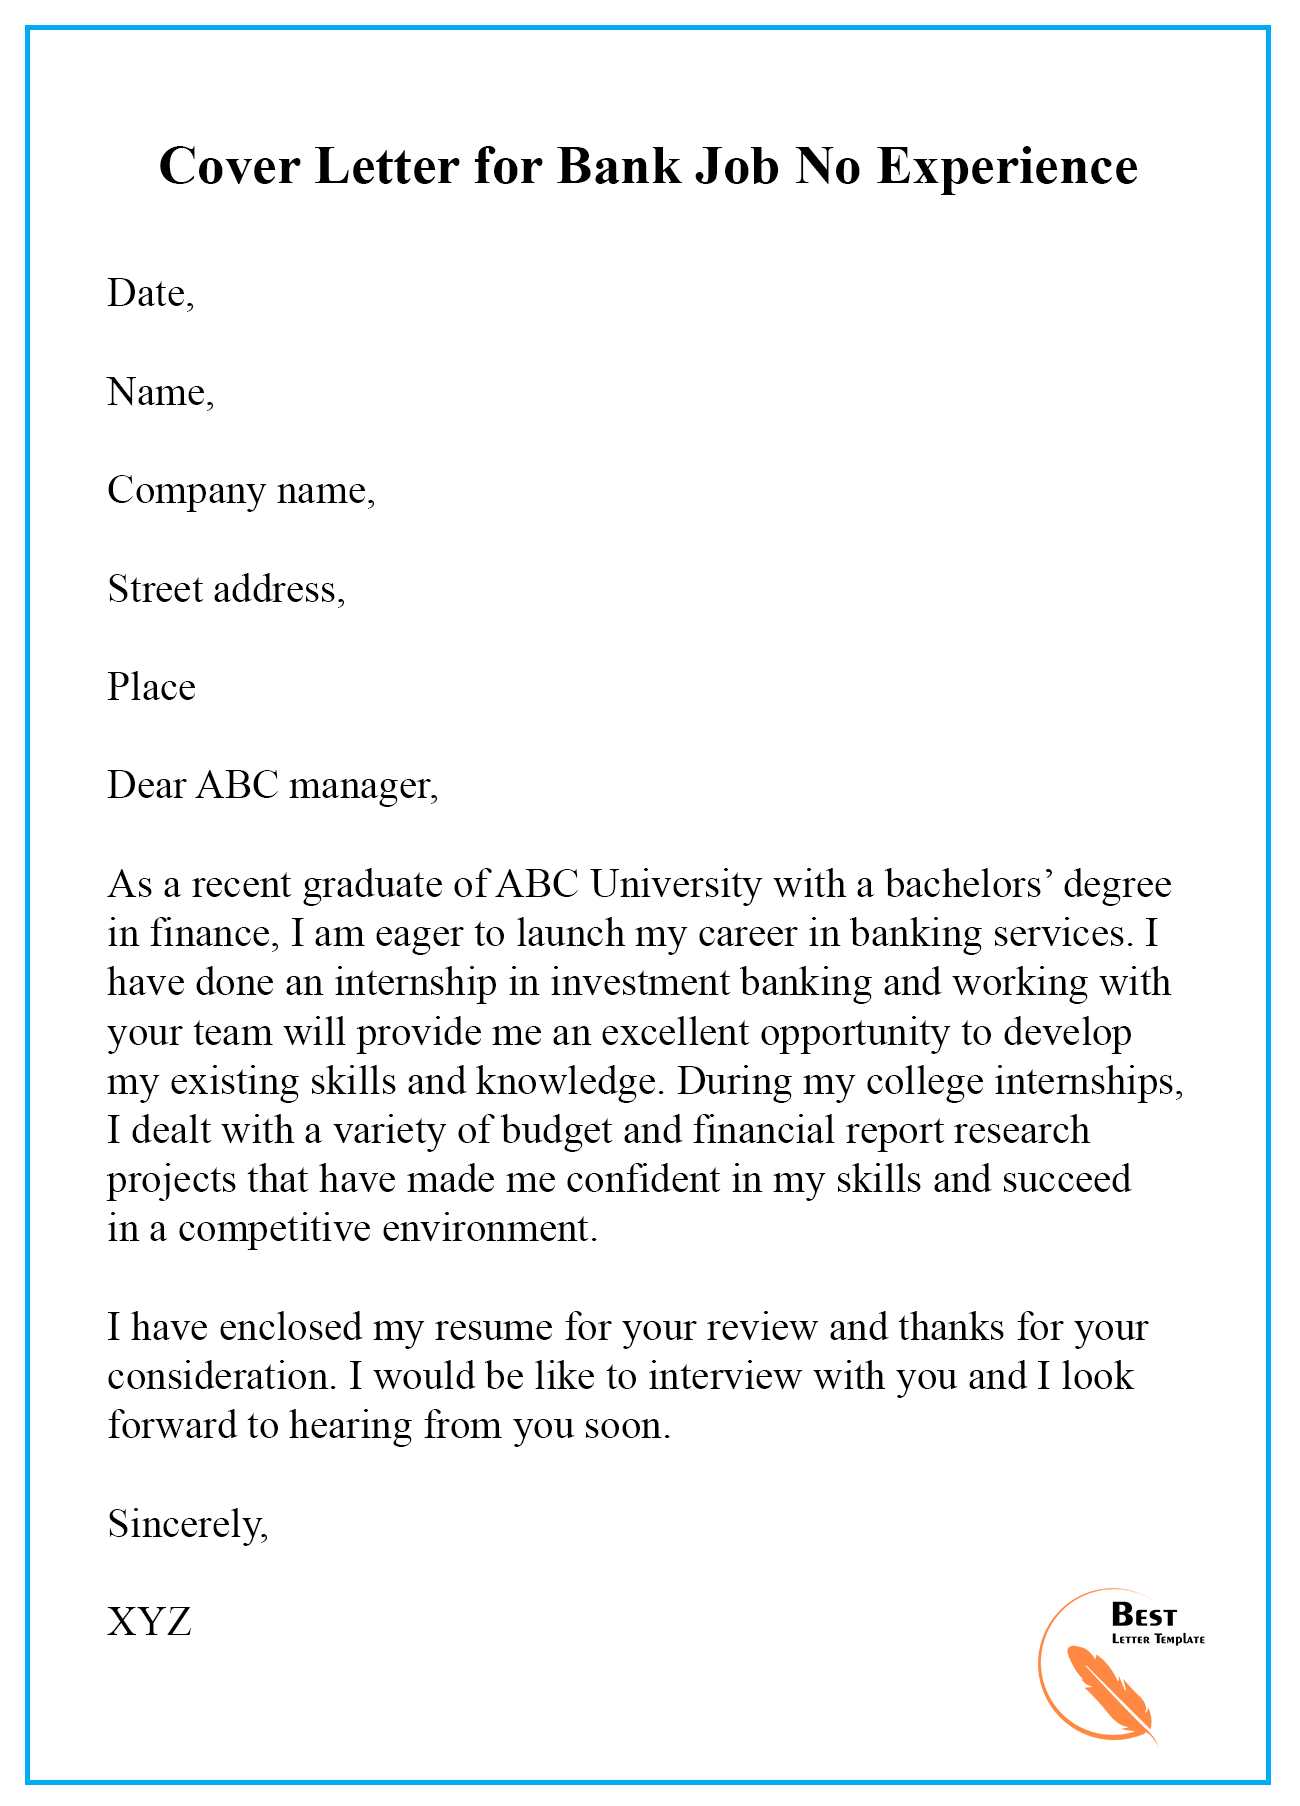 sample cover letter with no experience in that job